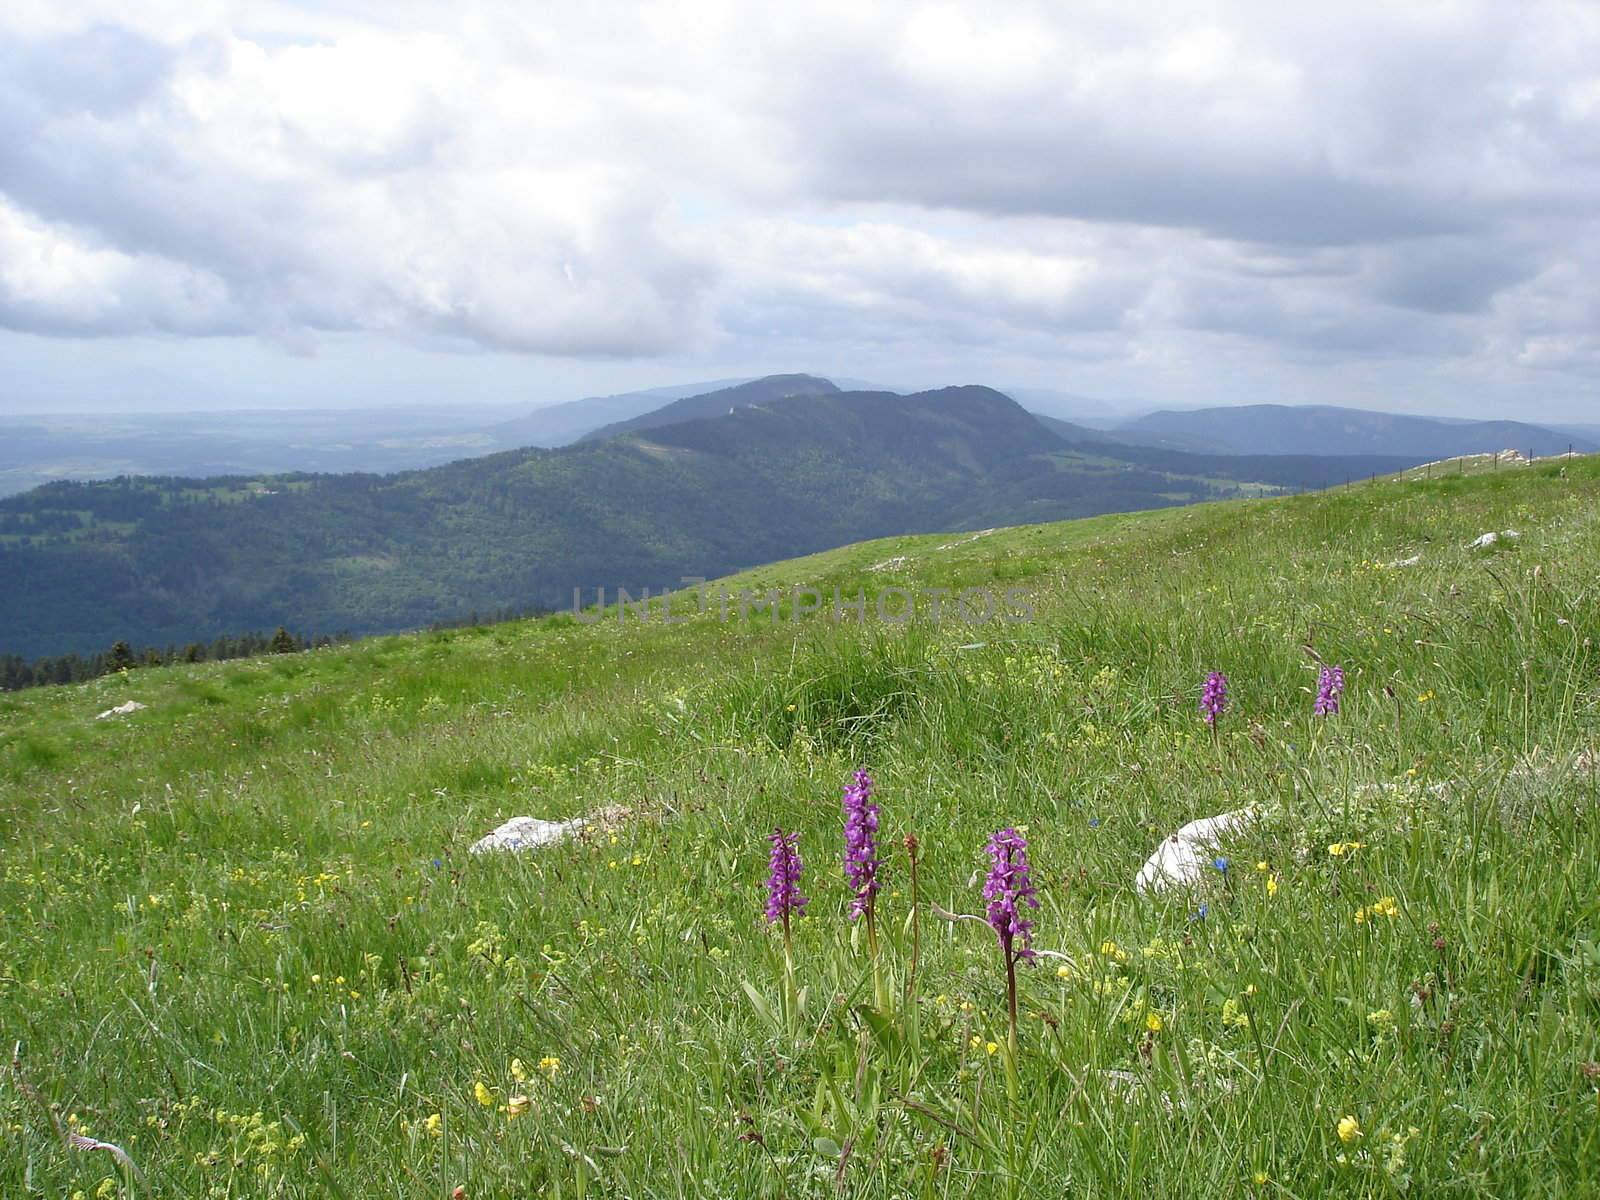 Orchids In A Highland Meadow In Chasseron Area Jura Mountains Switzerland.